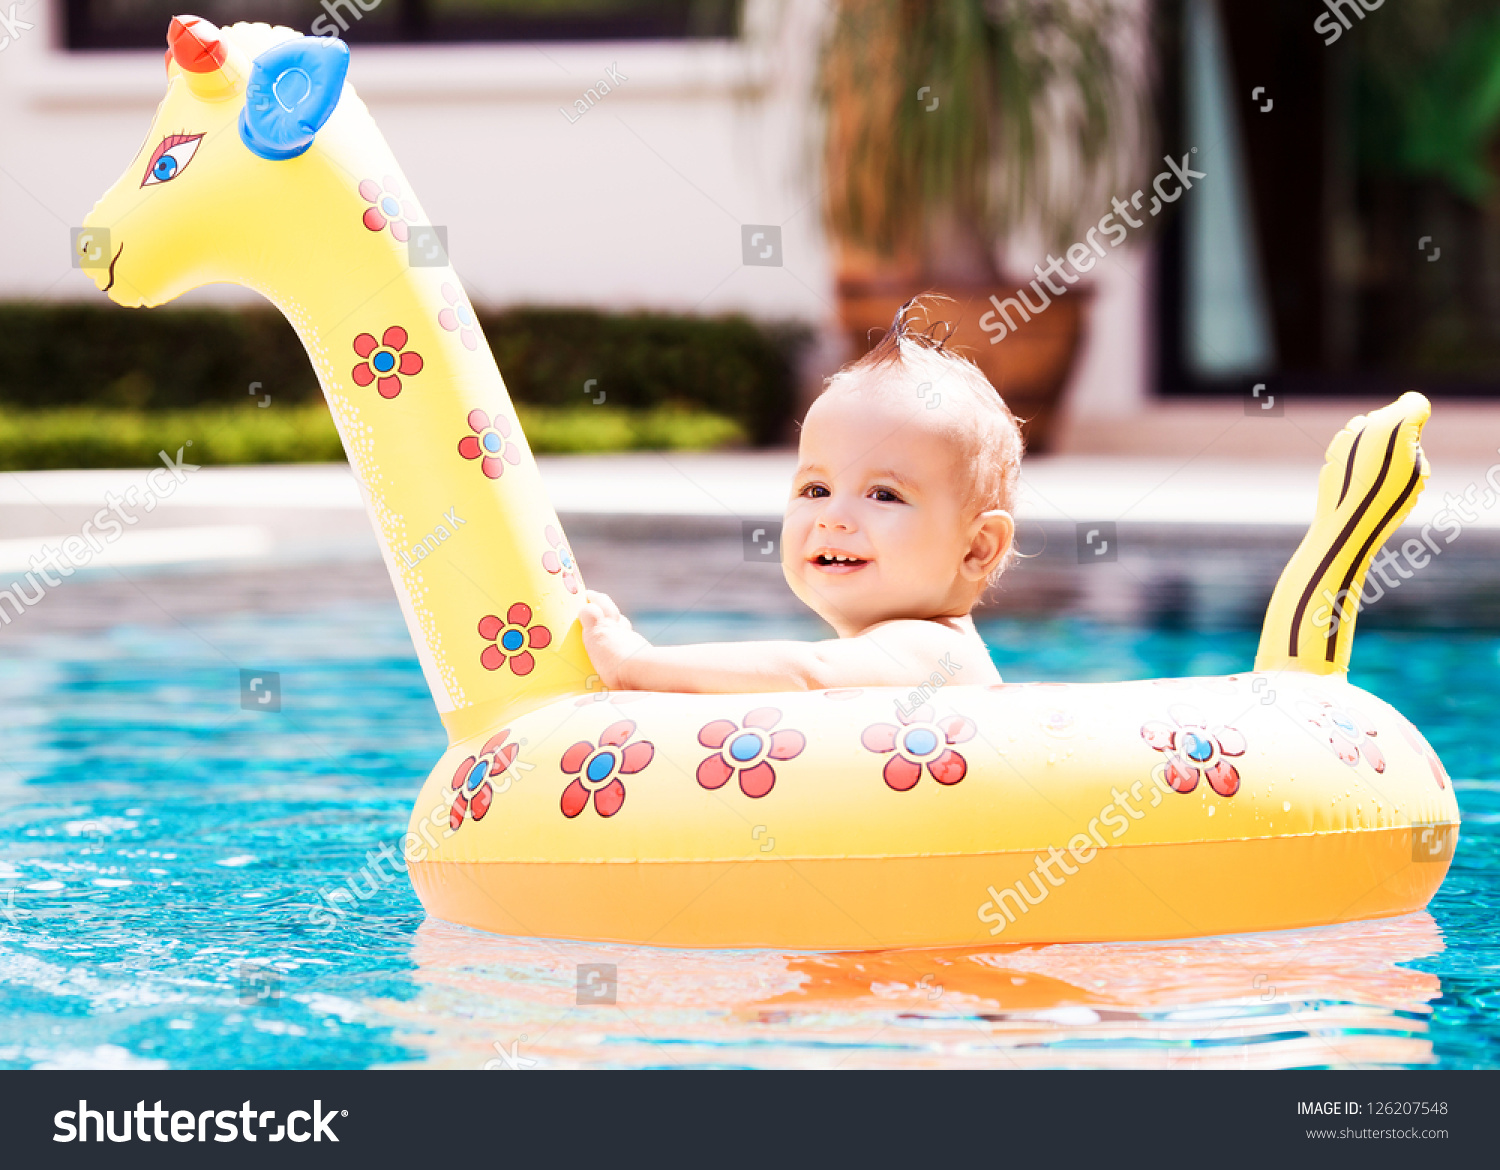 one year old pool float